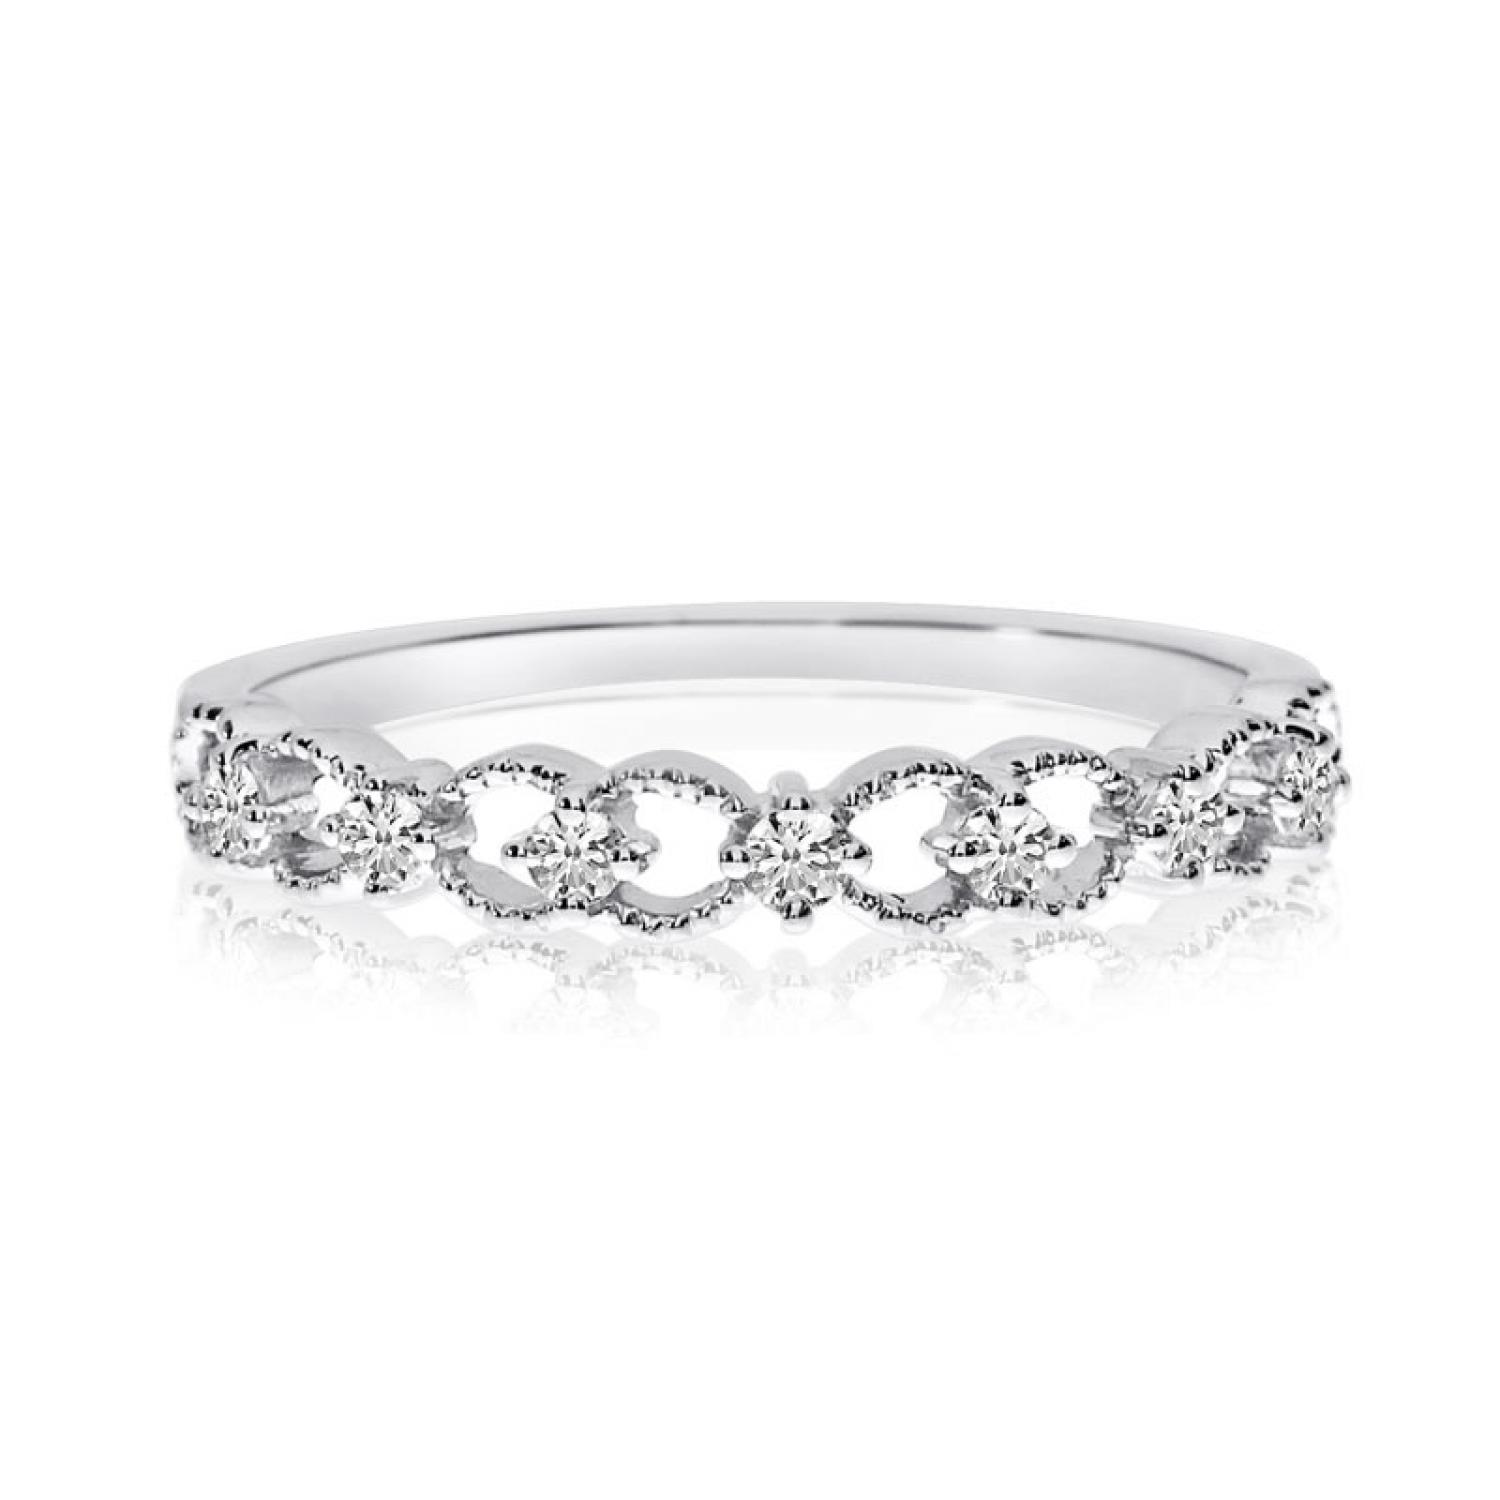 14K White Gold Diamond Braided Stackable Band